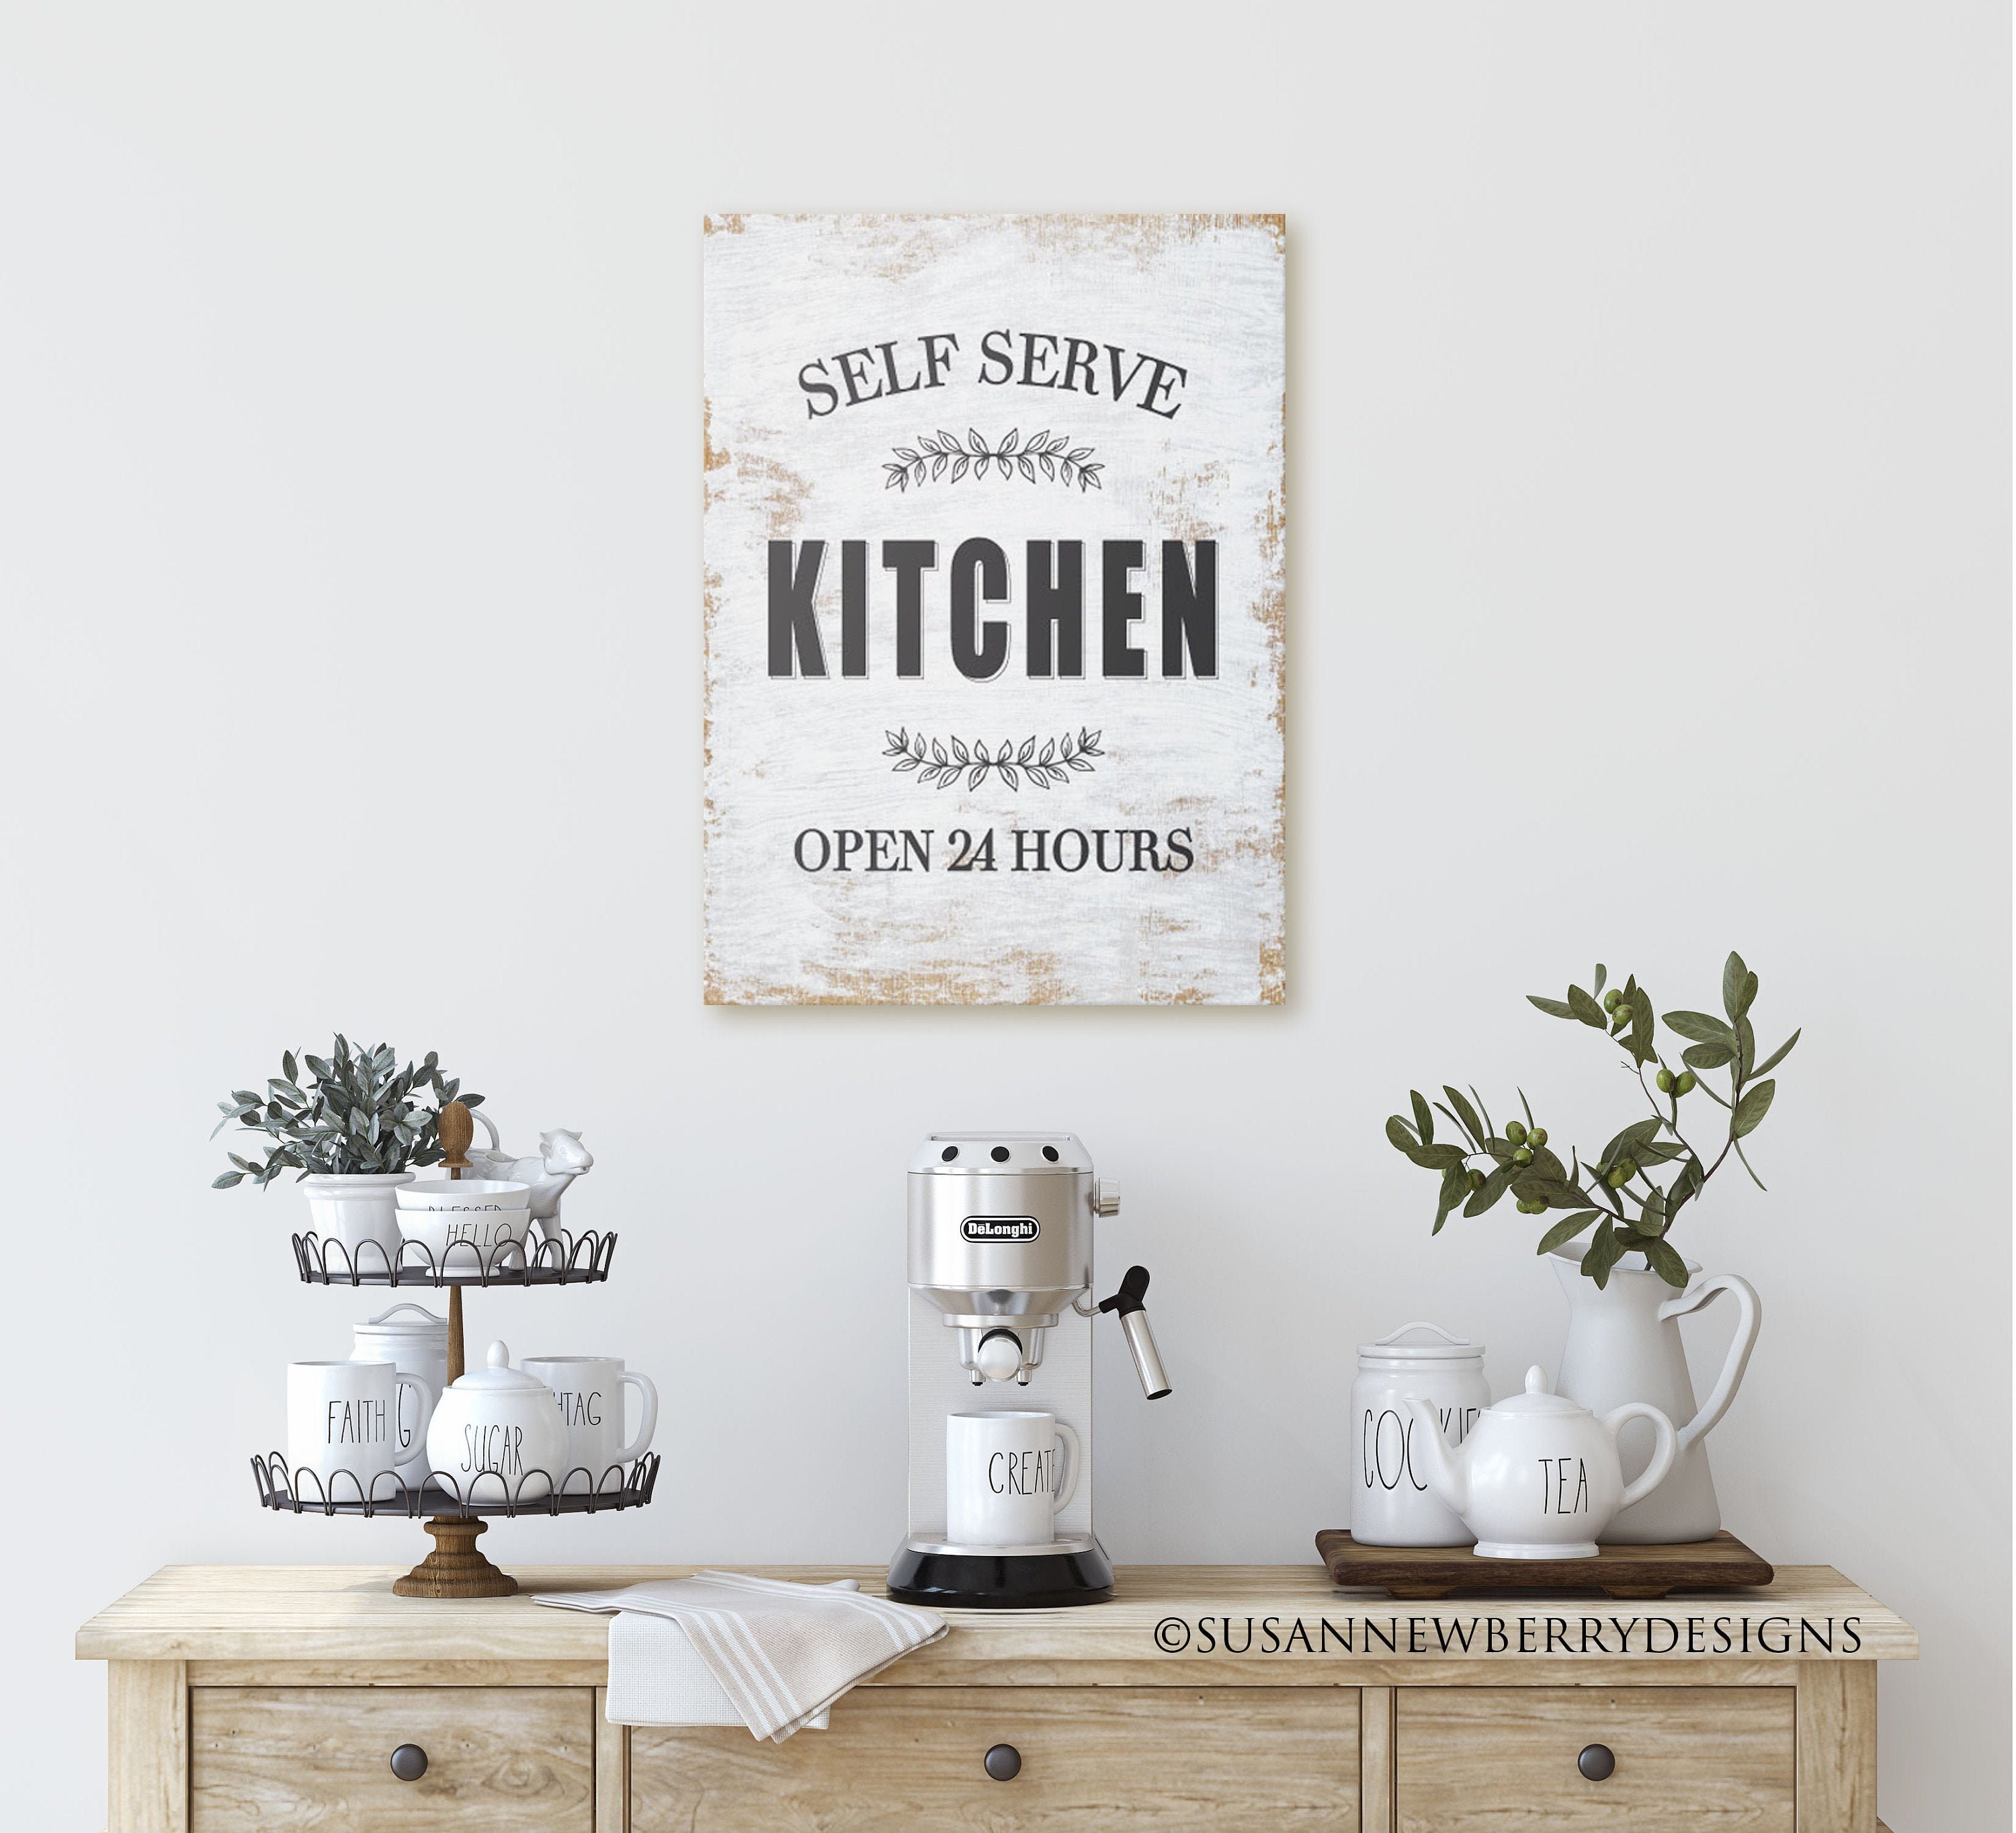 Personalized Kitchen Best of Times Large Farmhouse Canvas not